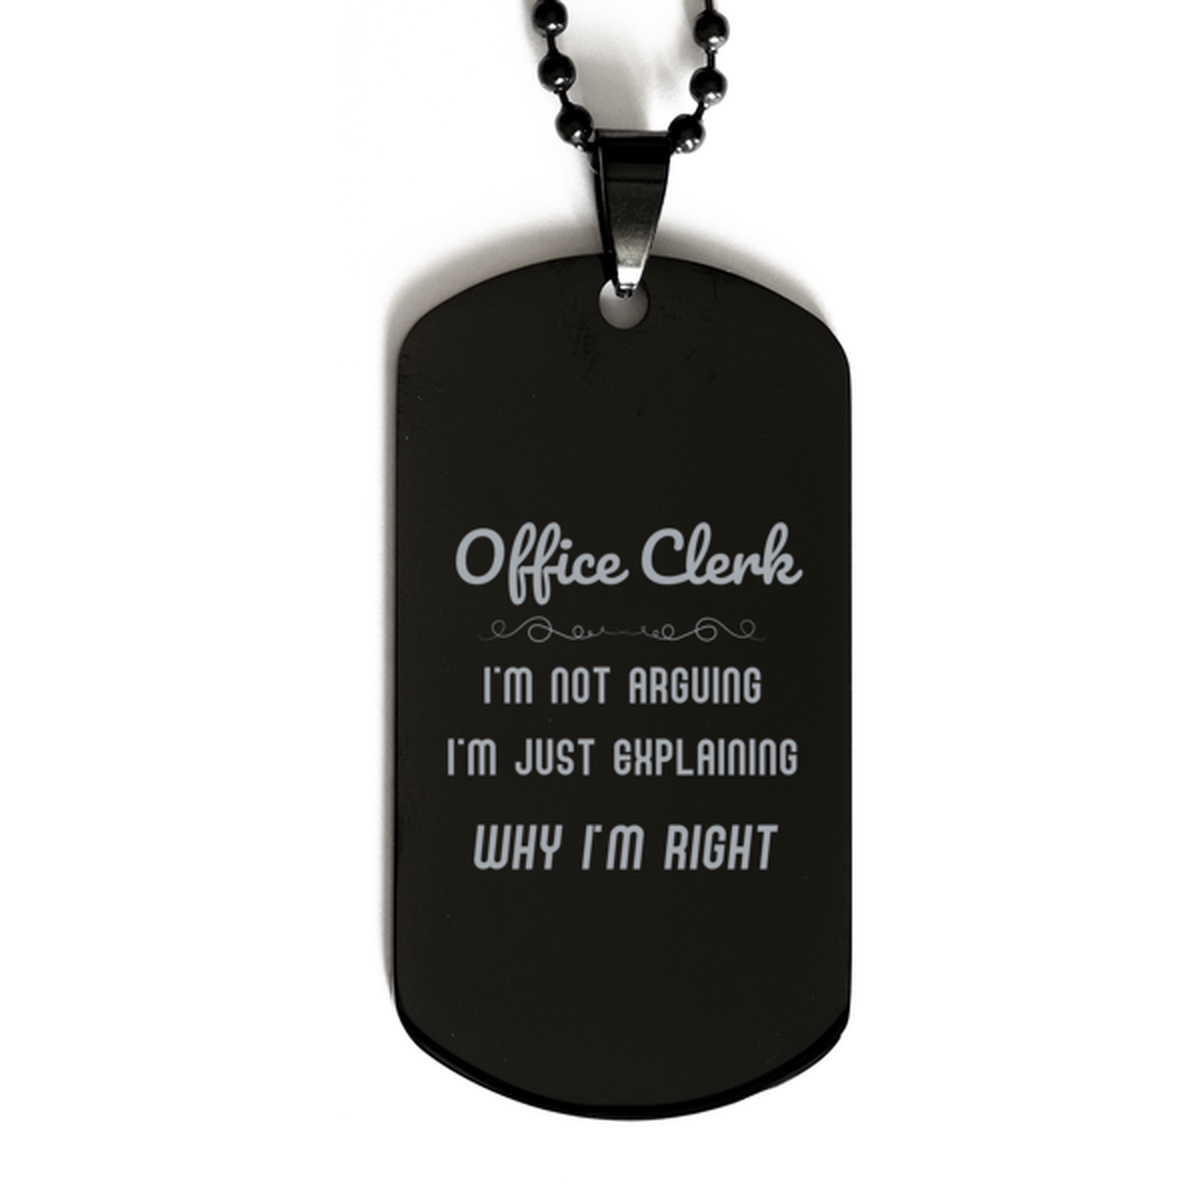 Office Clerk I'm not Arguing. I'm Just Explaining Why I'm RIGHT Black Dog Tag, Funny Saying Quote Office Clerk Gifts For Office Clerk Graduation Birthday Christmas Gifts for Men Women Coworker